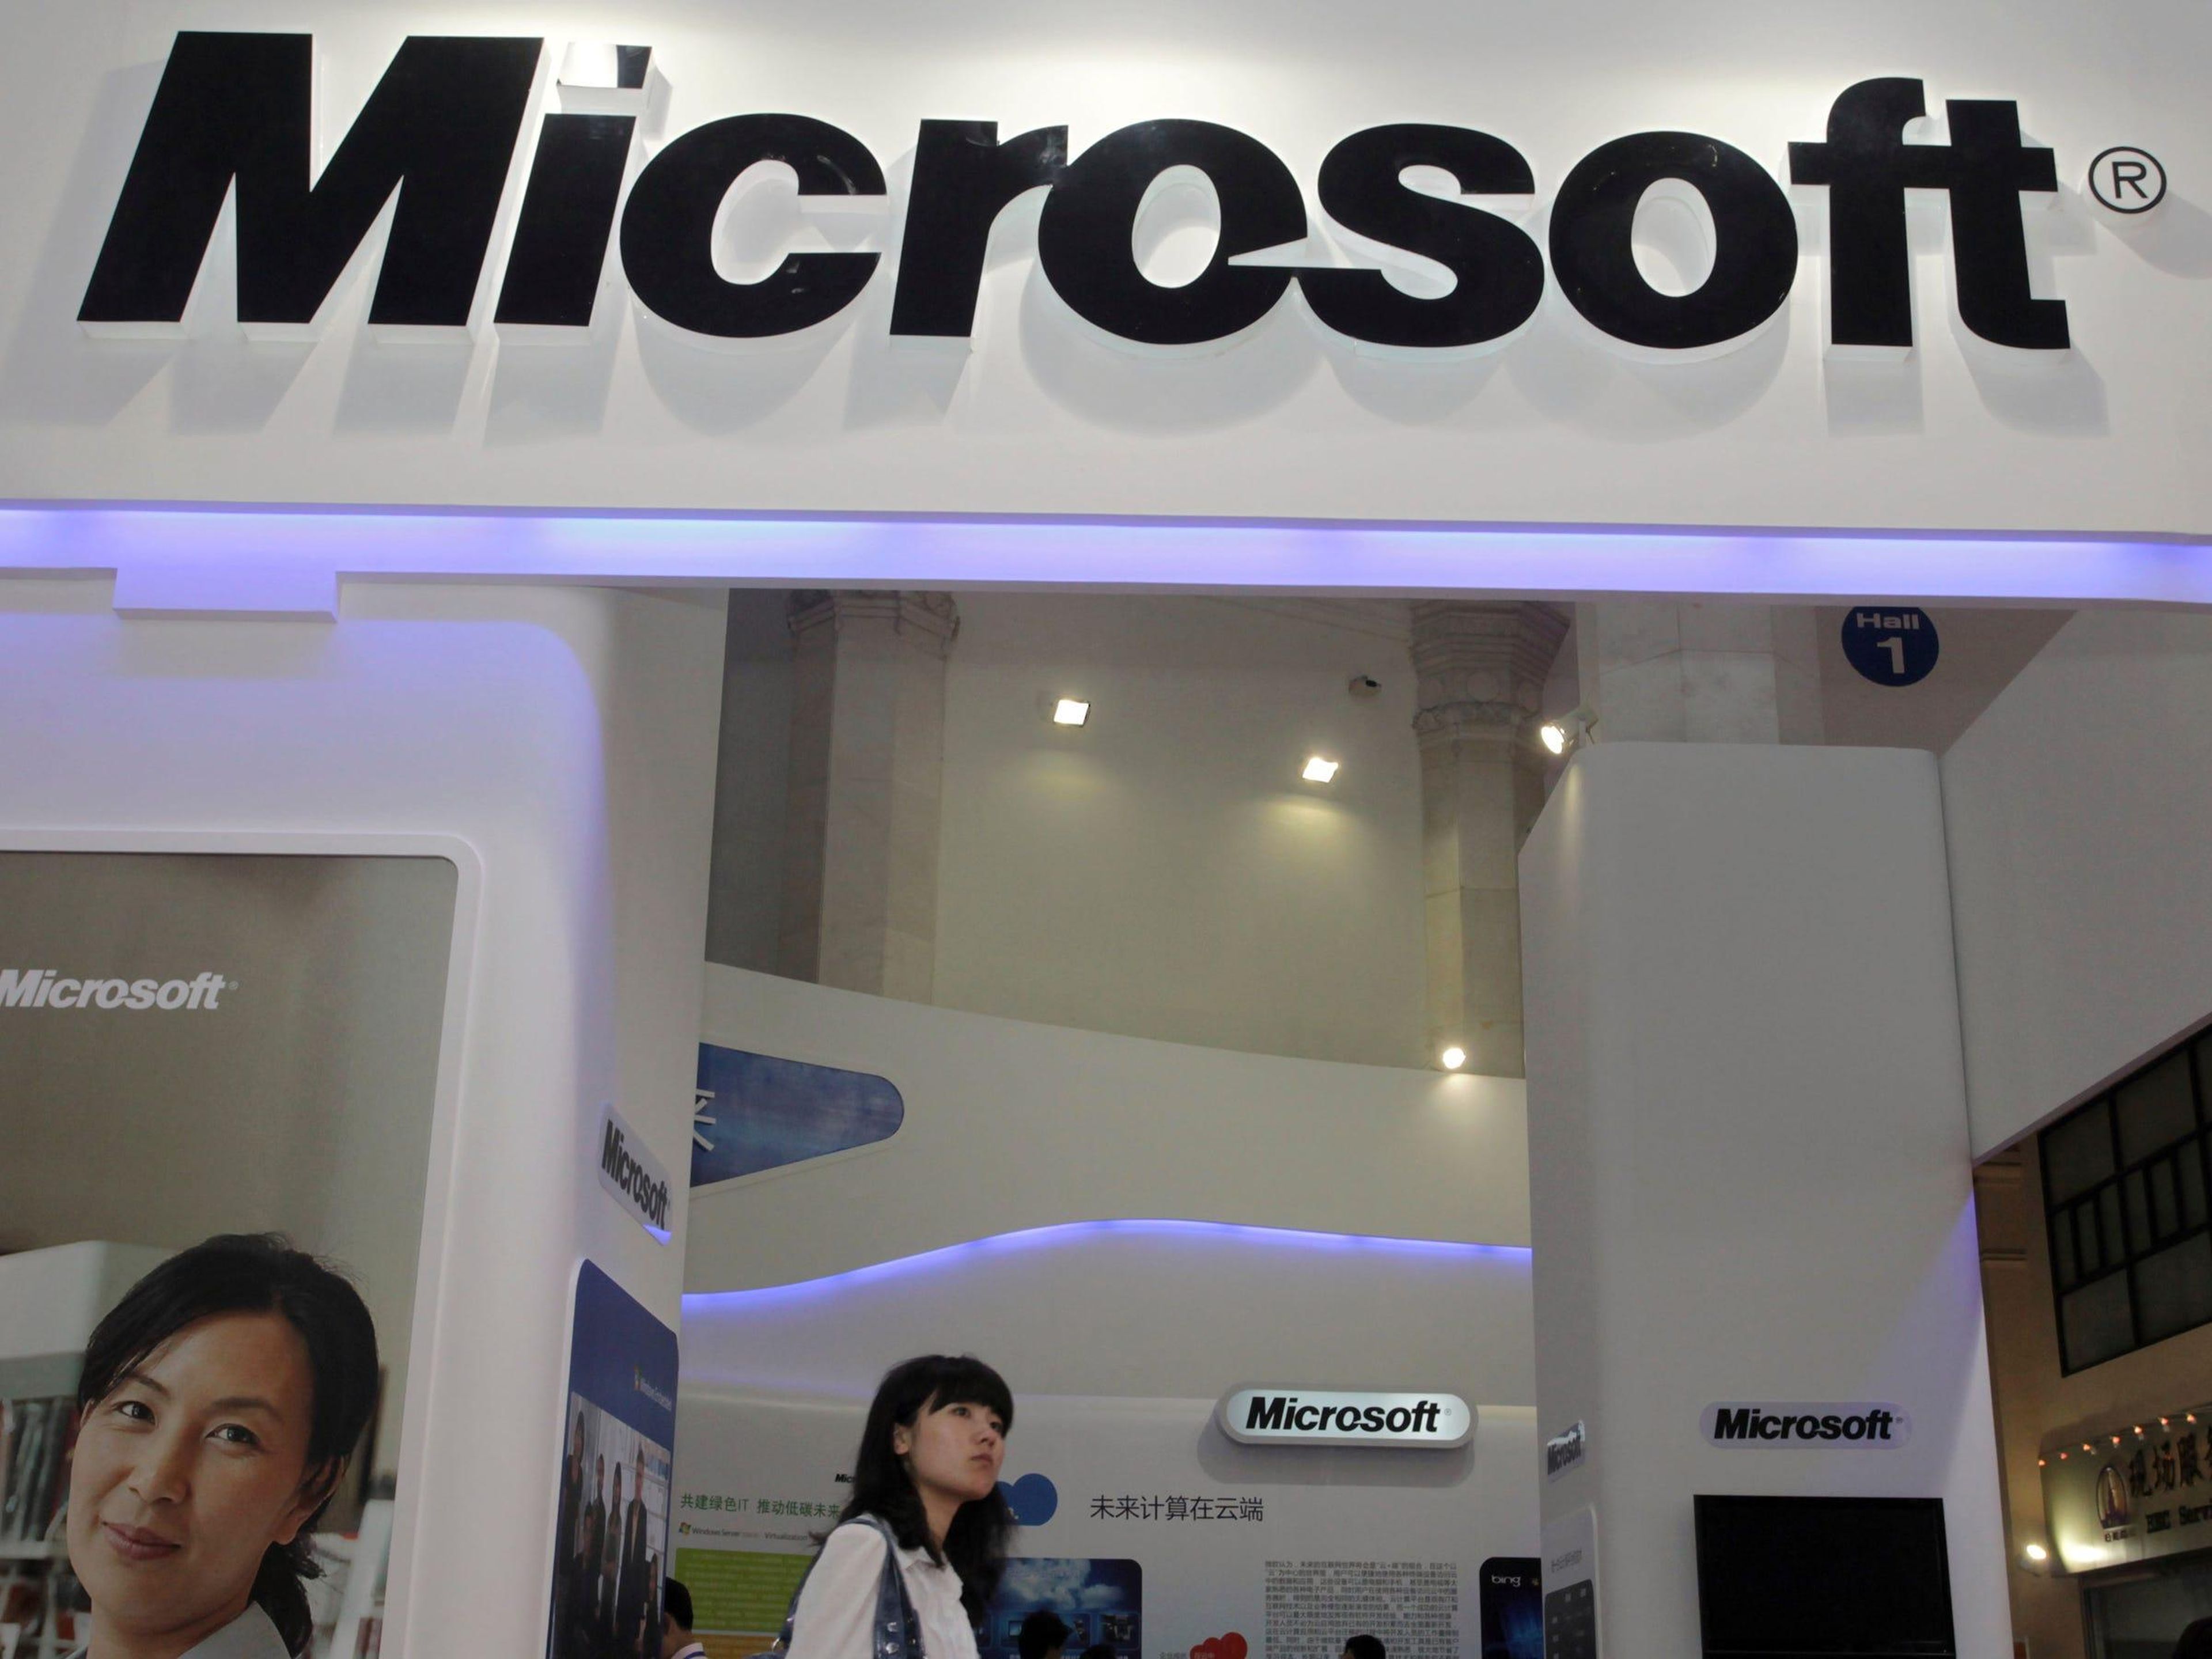 Microsoft told Forbes that it has asked all of its employees in China to work from home and cancel any non-essential travel.